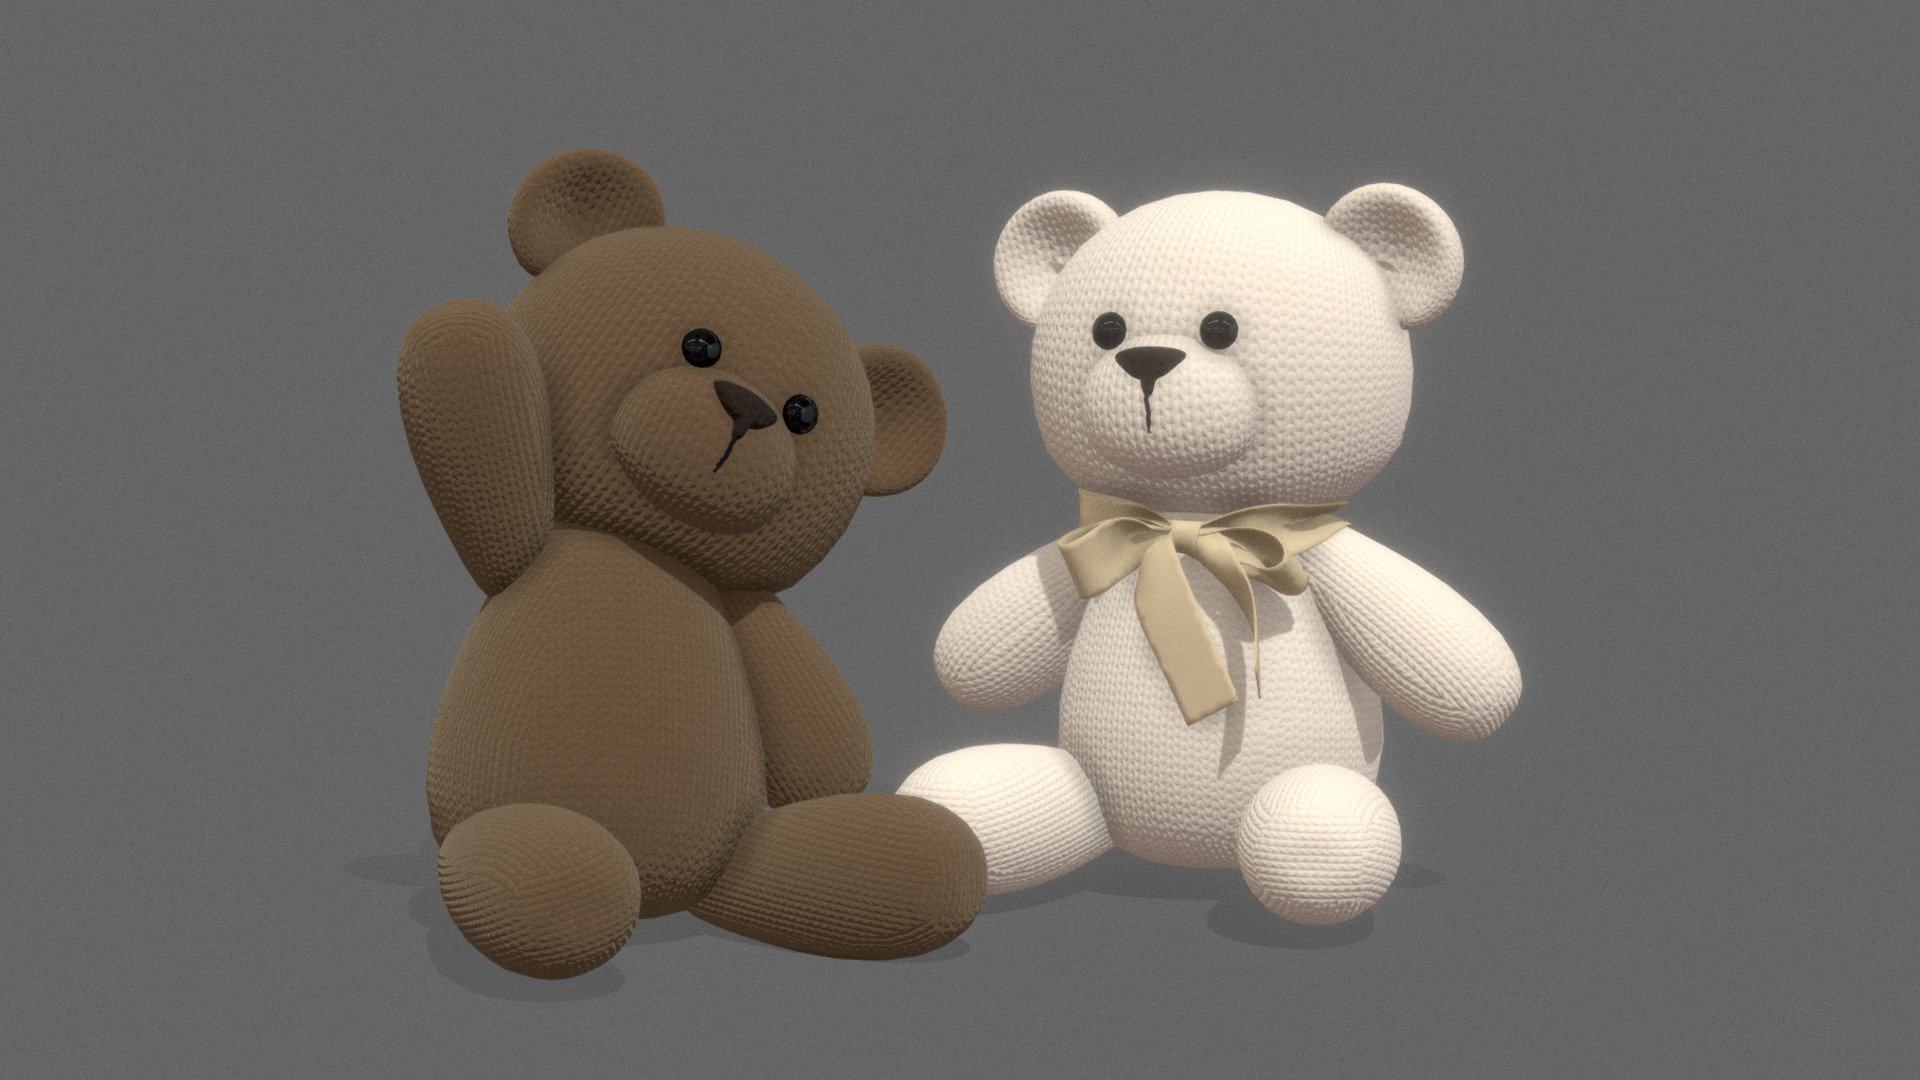 Cute plush teddy bear toys
Brown / white with a ribbon

Render example with hair particles using blender: https://www.instagram.com/p/Cbu5vf_NF8c/

rigged posed model
made with Blender - Teddy bears - Download Free 3D model by hectopod 3d model